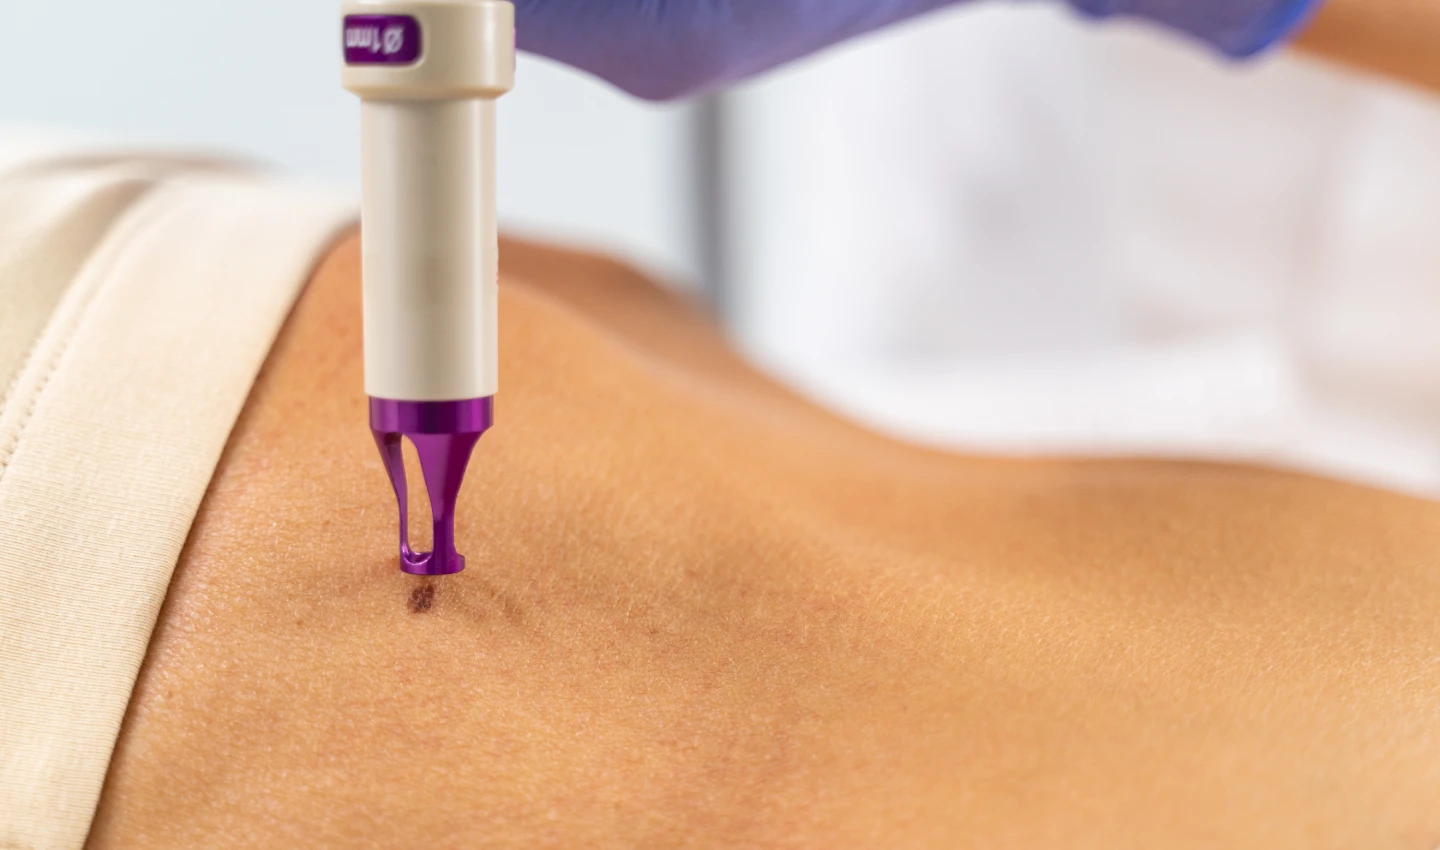 Laser scar reduction head emitting beams of light onto the skin.